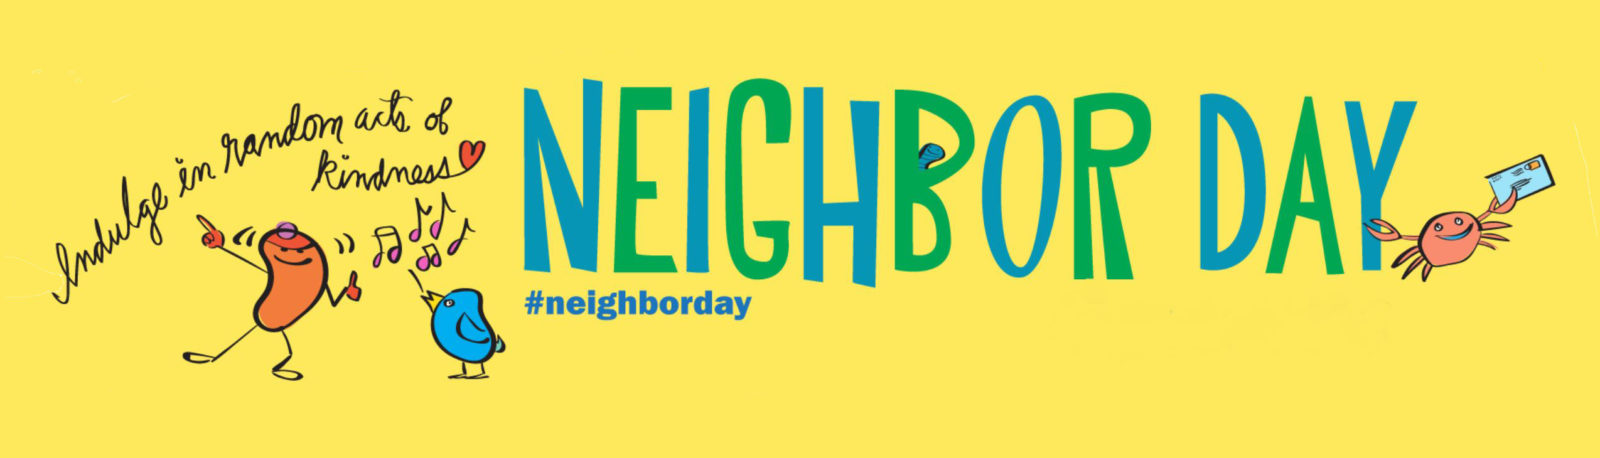 Neighbor Day banner - "indulge in random acts of kindness" #neighborday